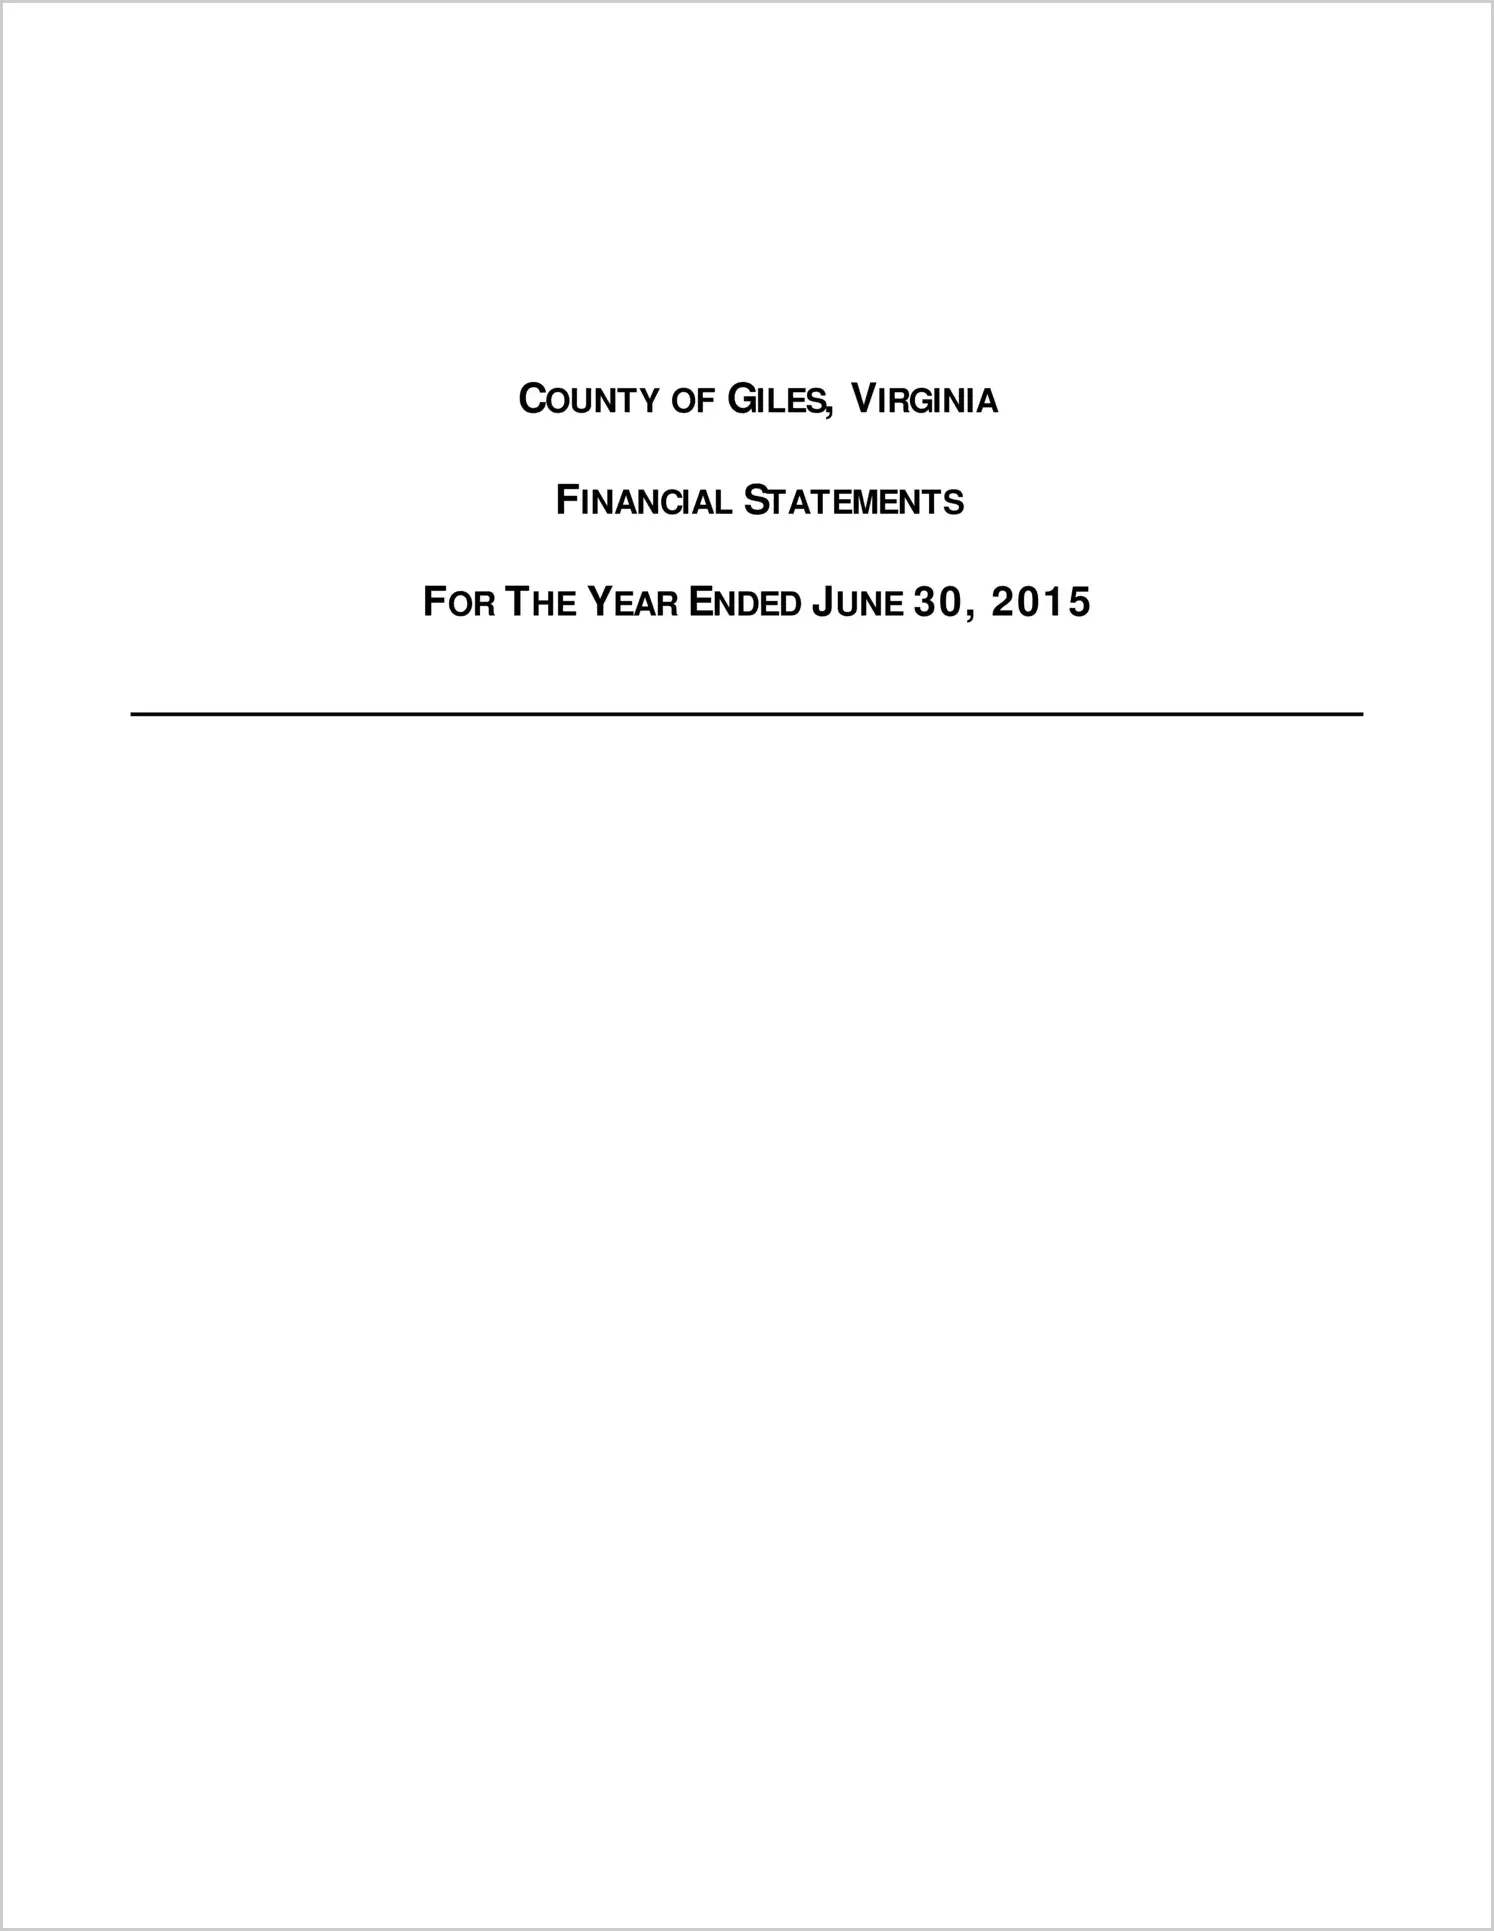 2015 Annual Financial Report for County of Giles